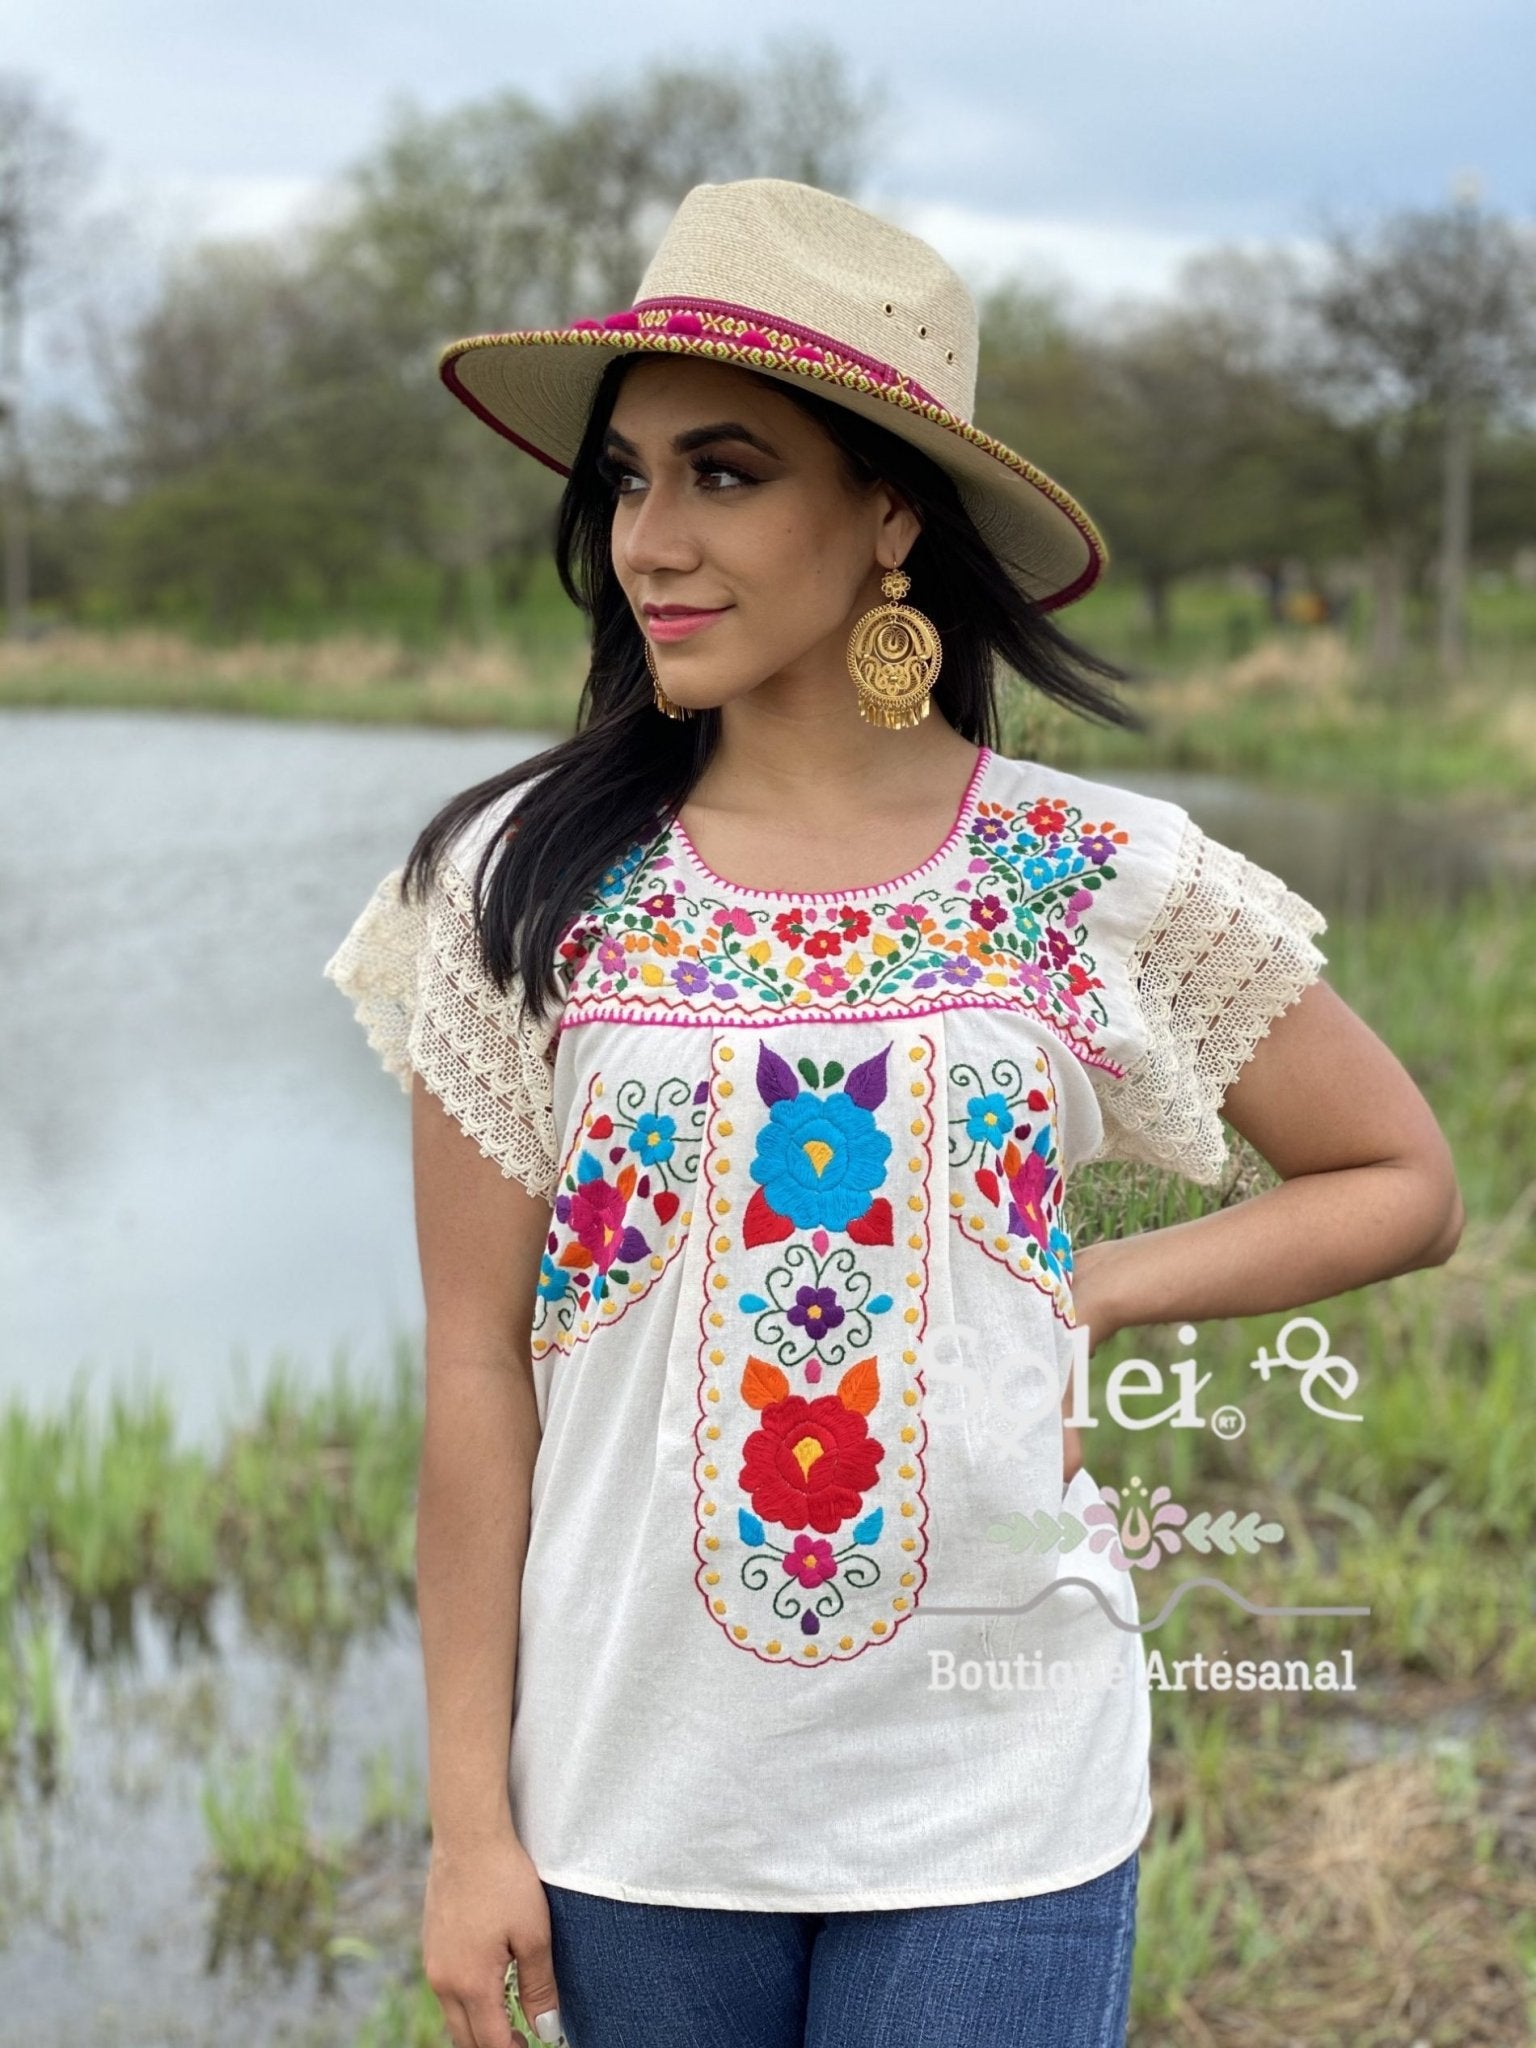 De la Rosa Blouse Short sleeves Tunic blouse with lace details, colorful flowers hand embroidered - Solei Store